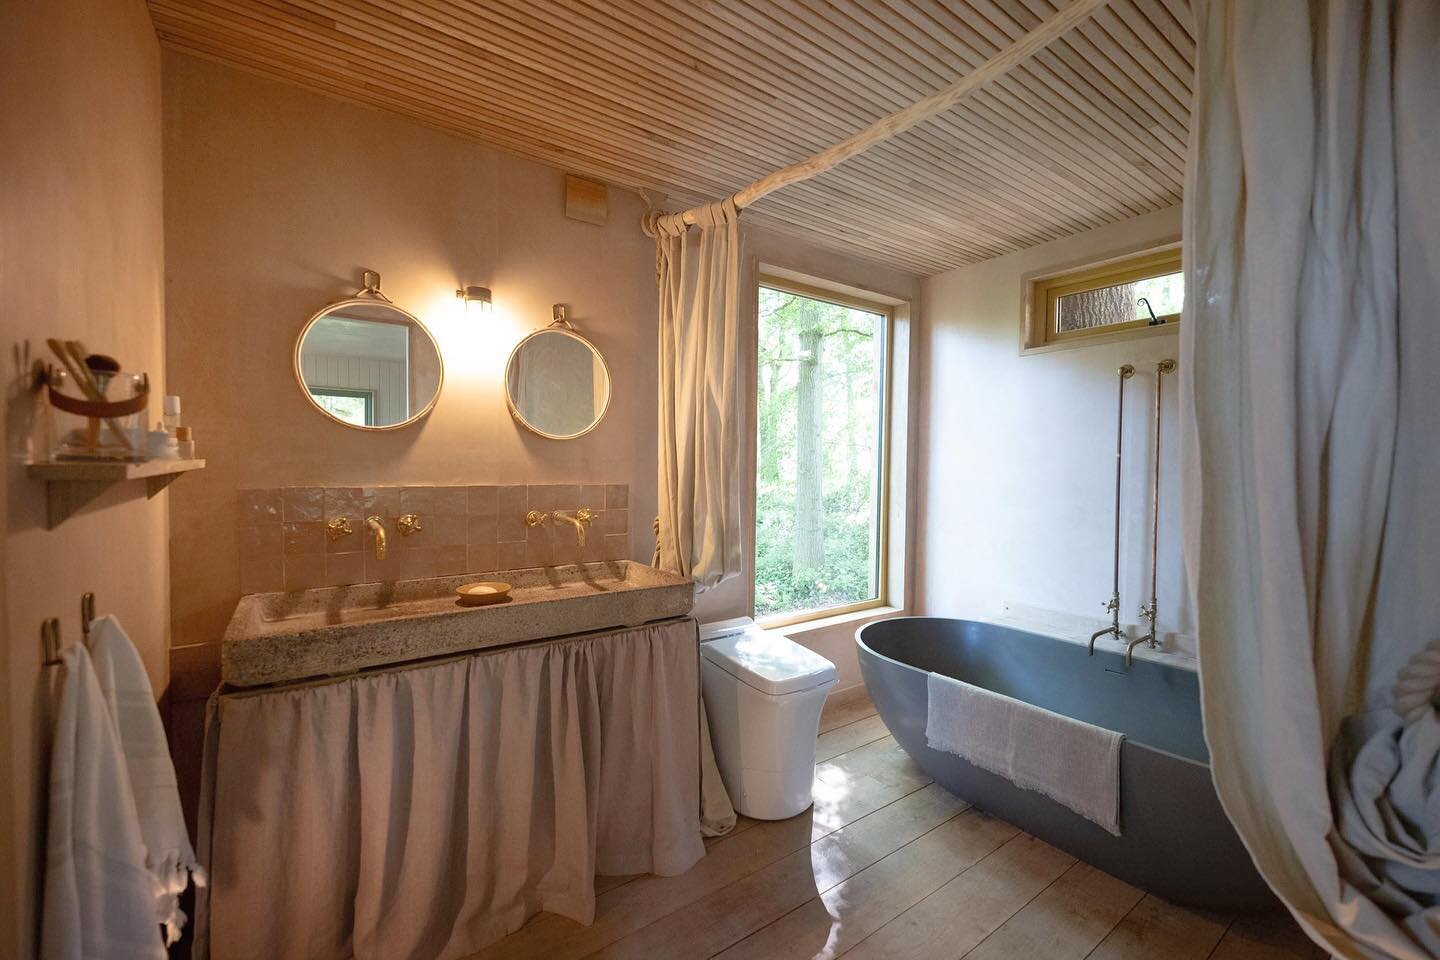 The bathroom ceiling in The Quist is painstakingly clad in oak running continuously from inside and into the shower area outside to pull the two spaces together into 1 bathroom. 

A hot outdoor shower is always a treat, and with total privacy in the 